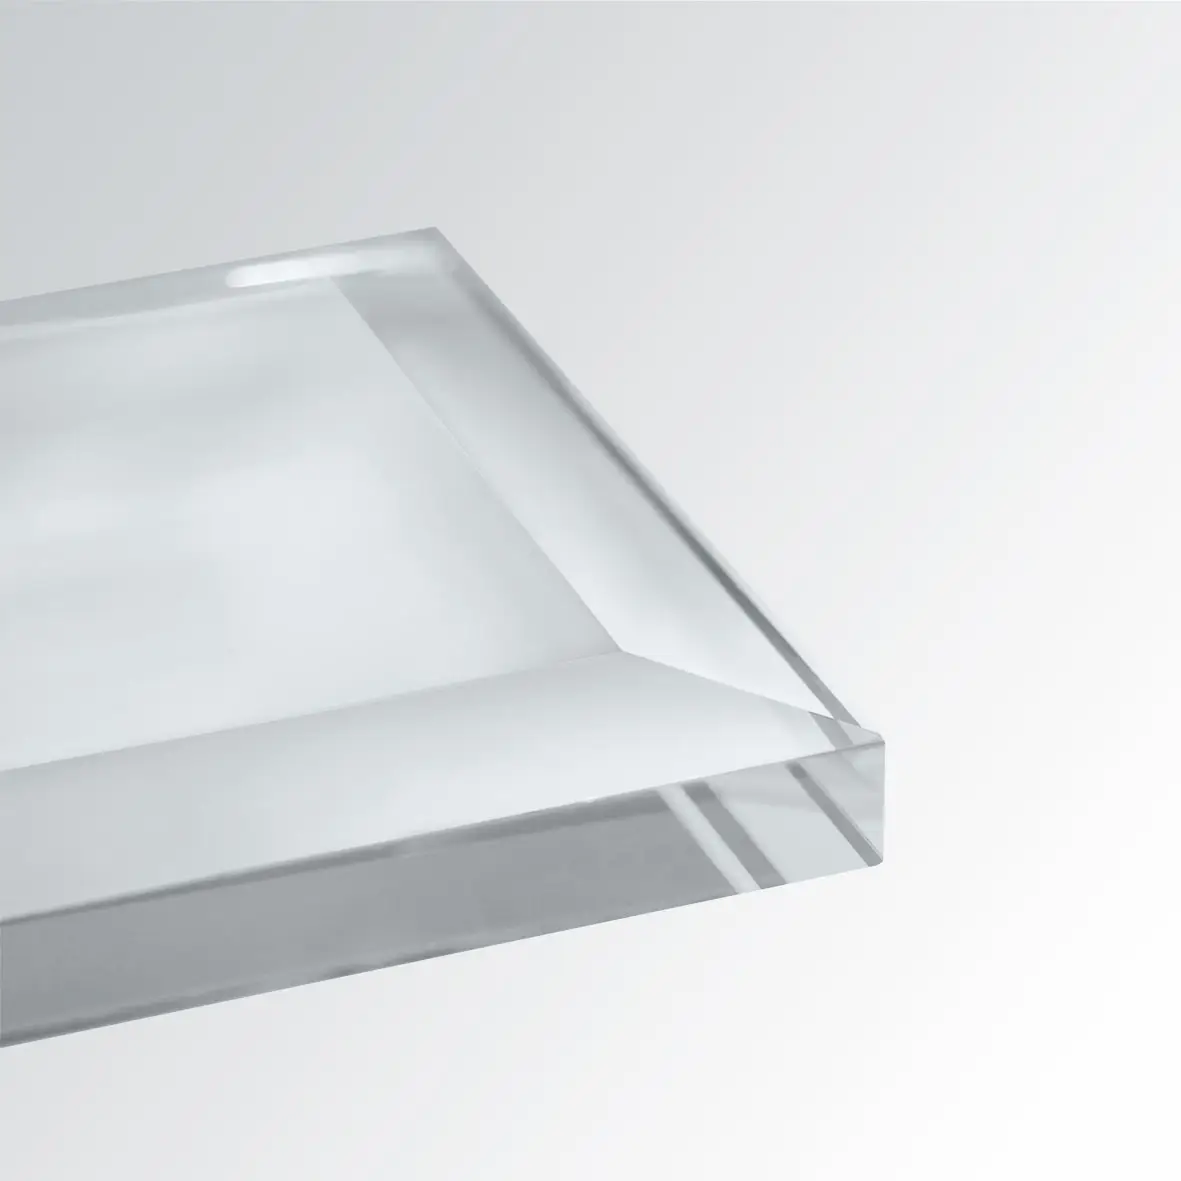 Photocrystal Rectangle (bevelled/phased, thickness 12mm)